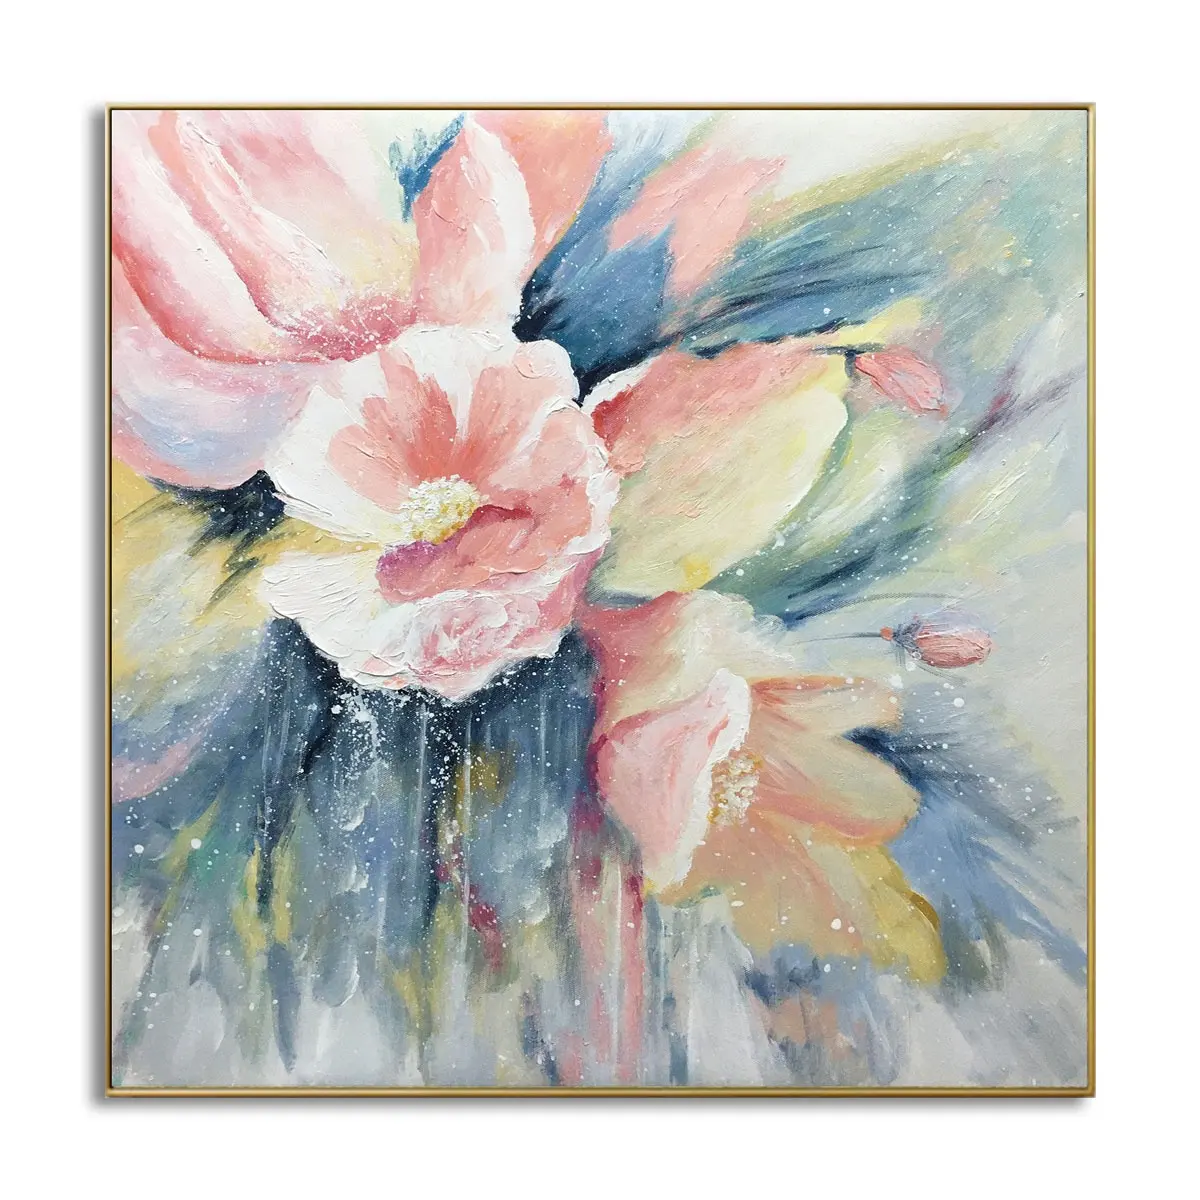 Flower Oil Painting art Abstract Rose Flower Painting Landscape Painting Floral Wall Art Canvas Spring Living Room Wall Decor